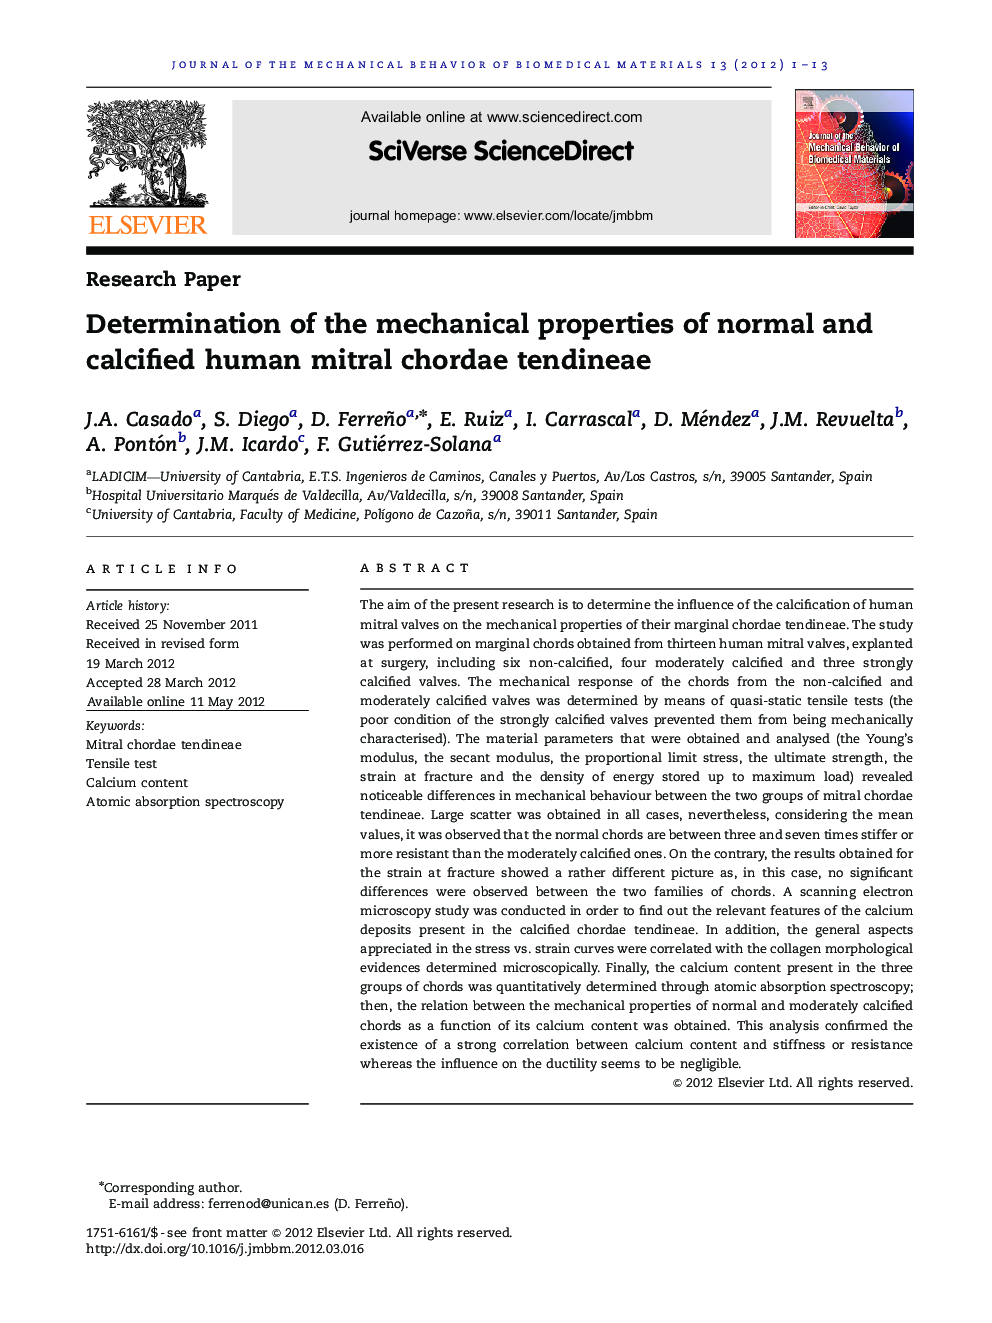 Determination of the mechanical properties of normal and calcified human mitral chordae tendineae